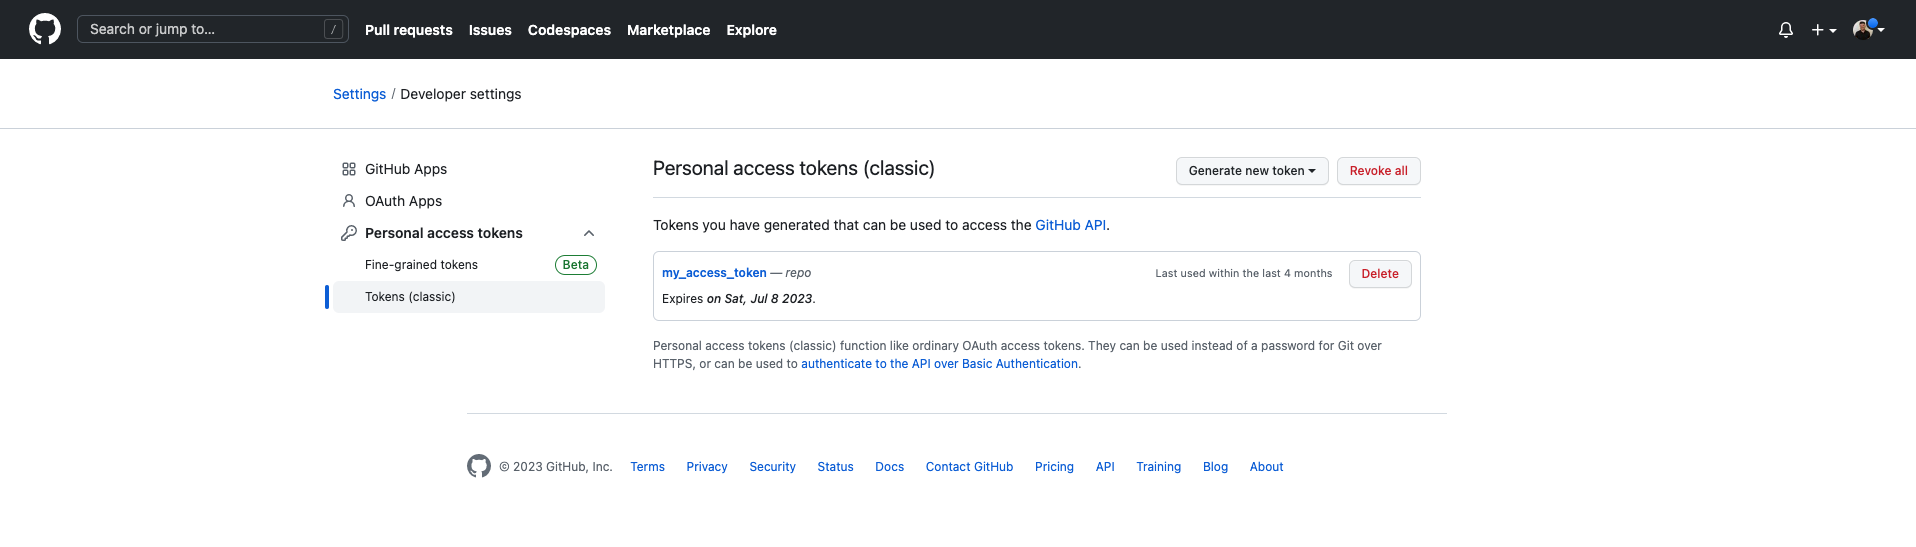 Settings for your personal access token.